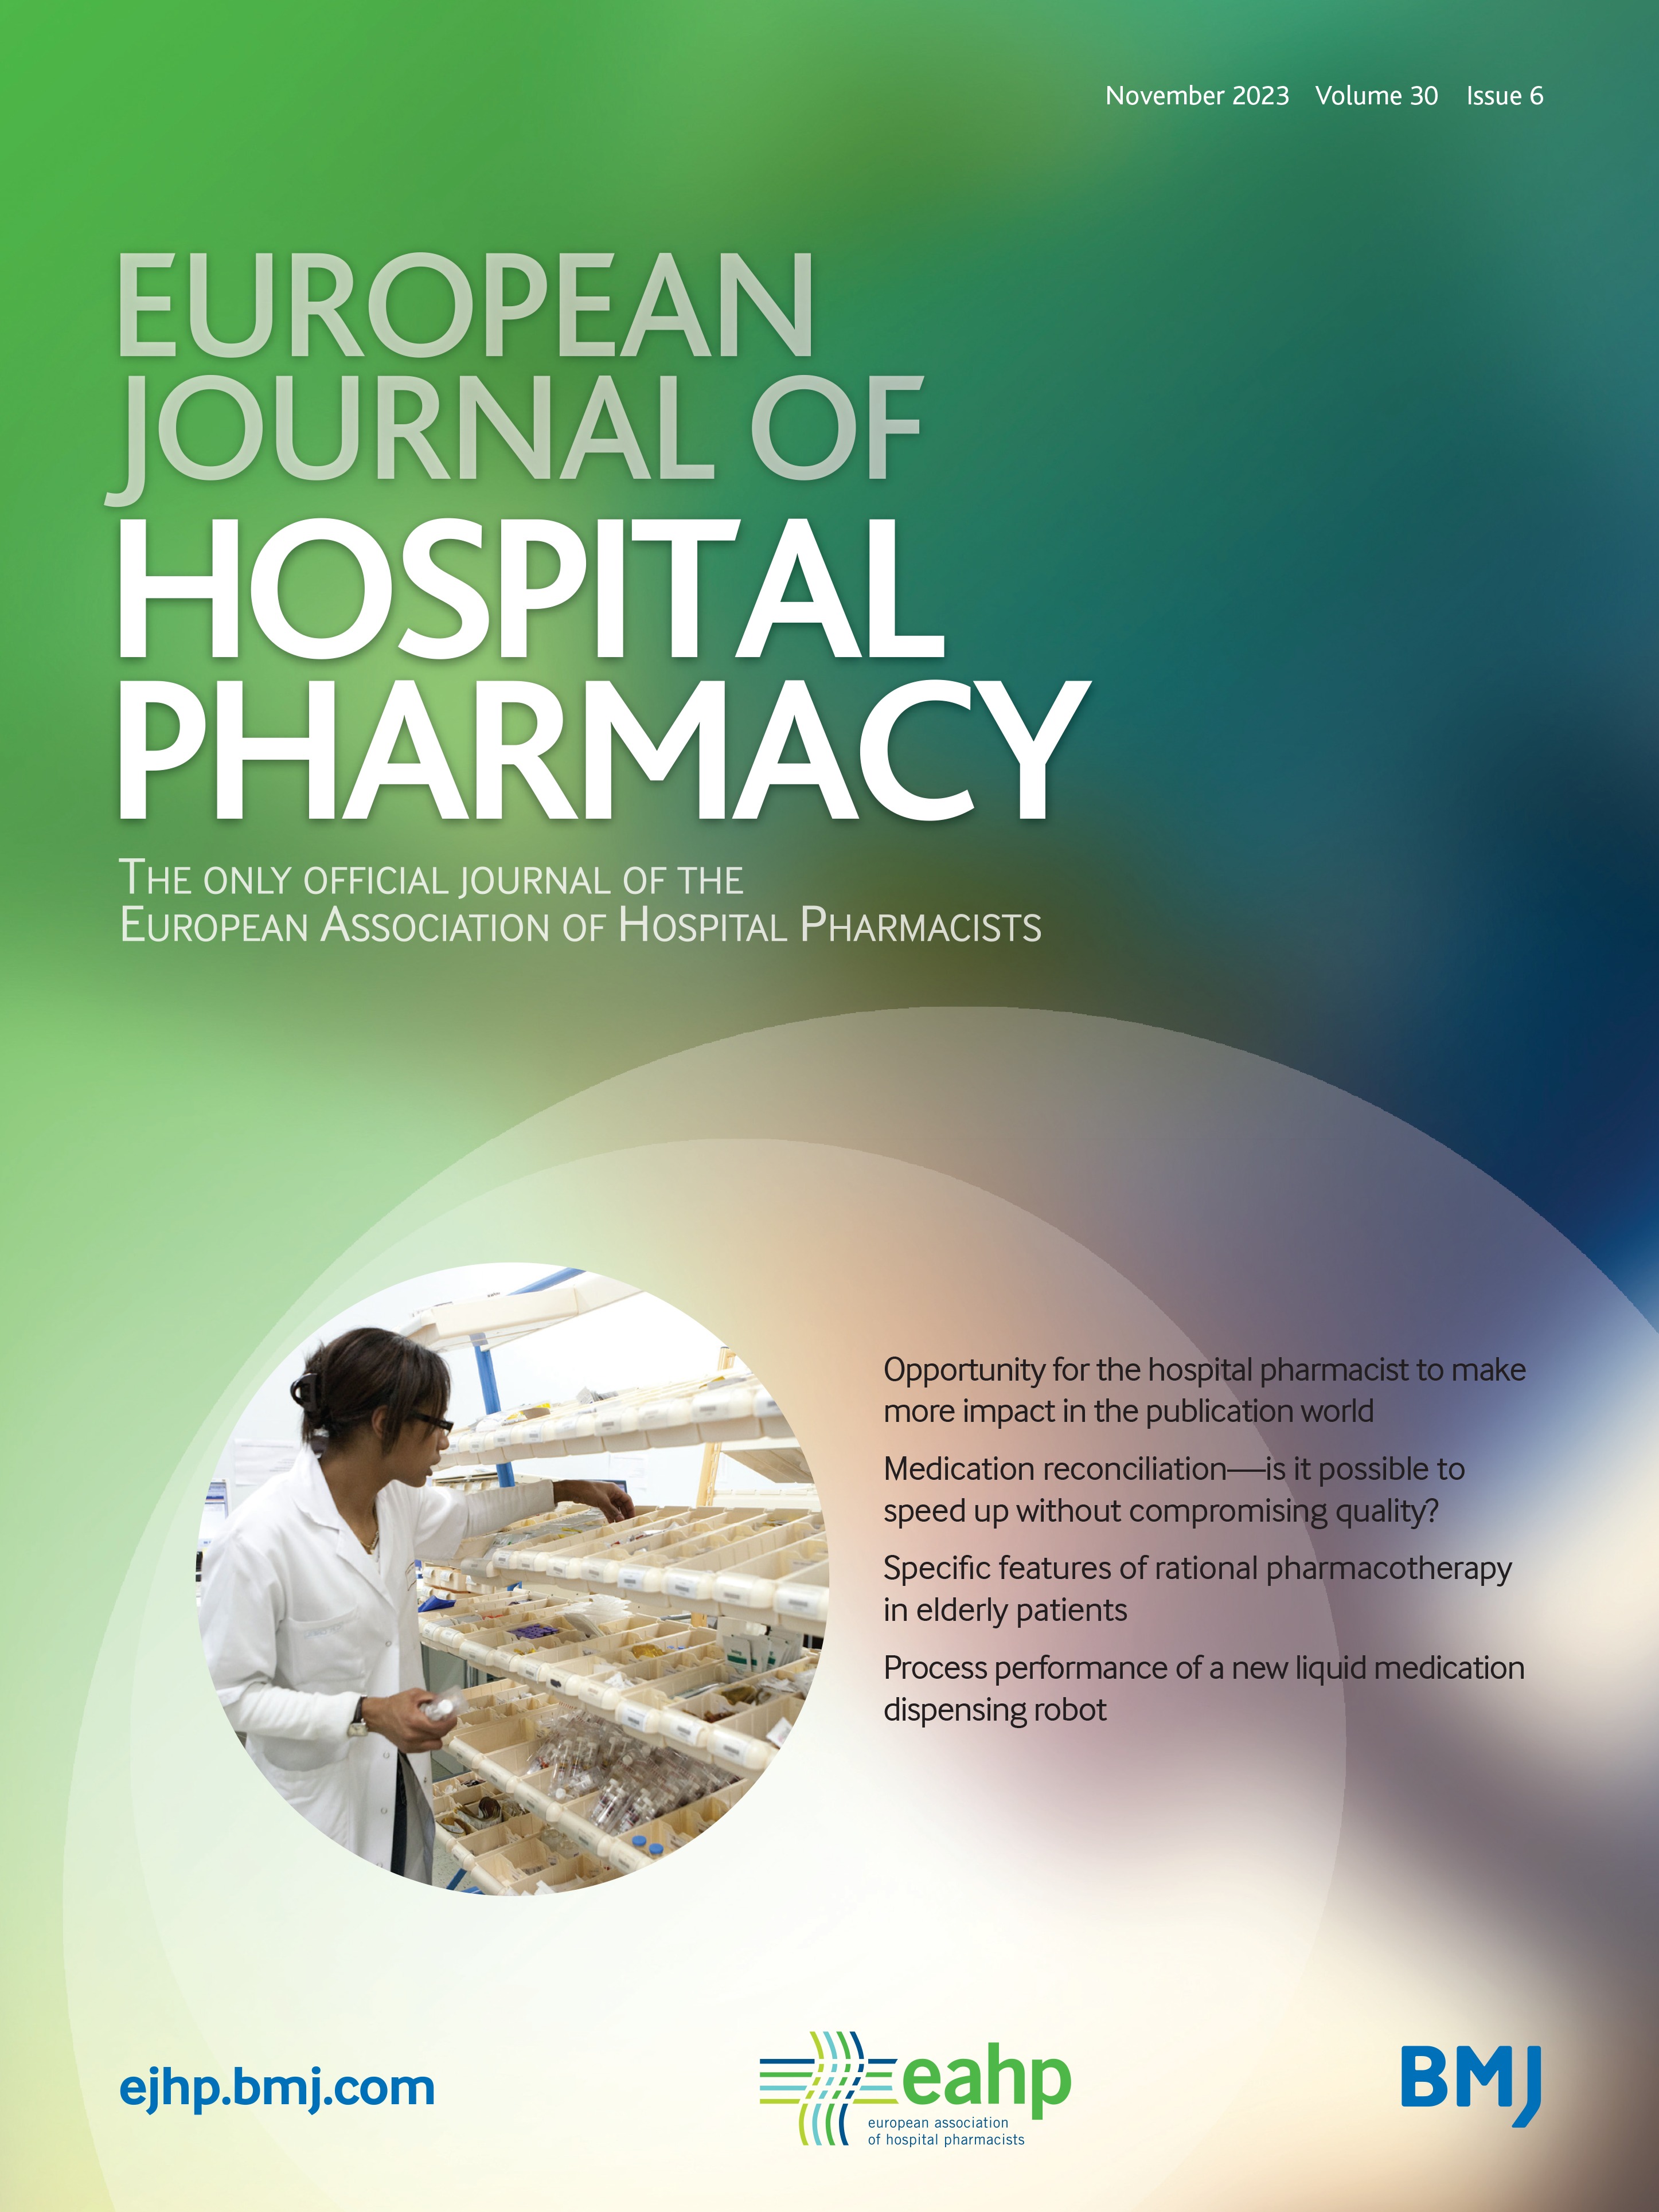 Defining a new term: defensive hospital pharmacy practices